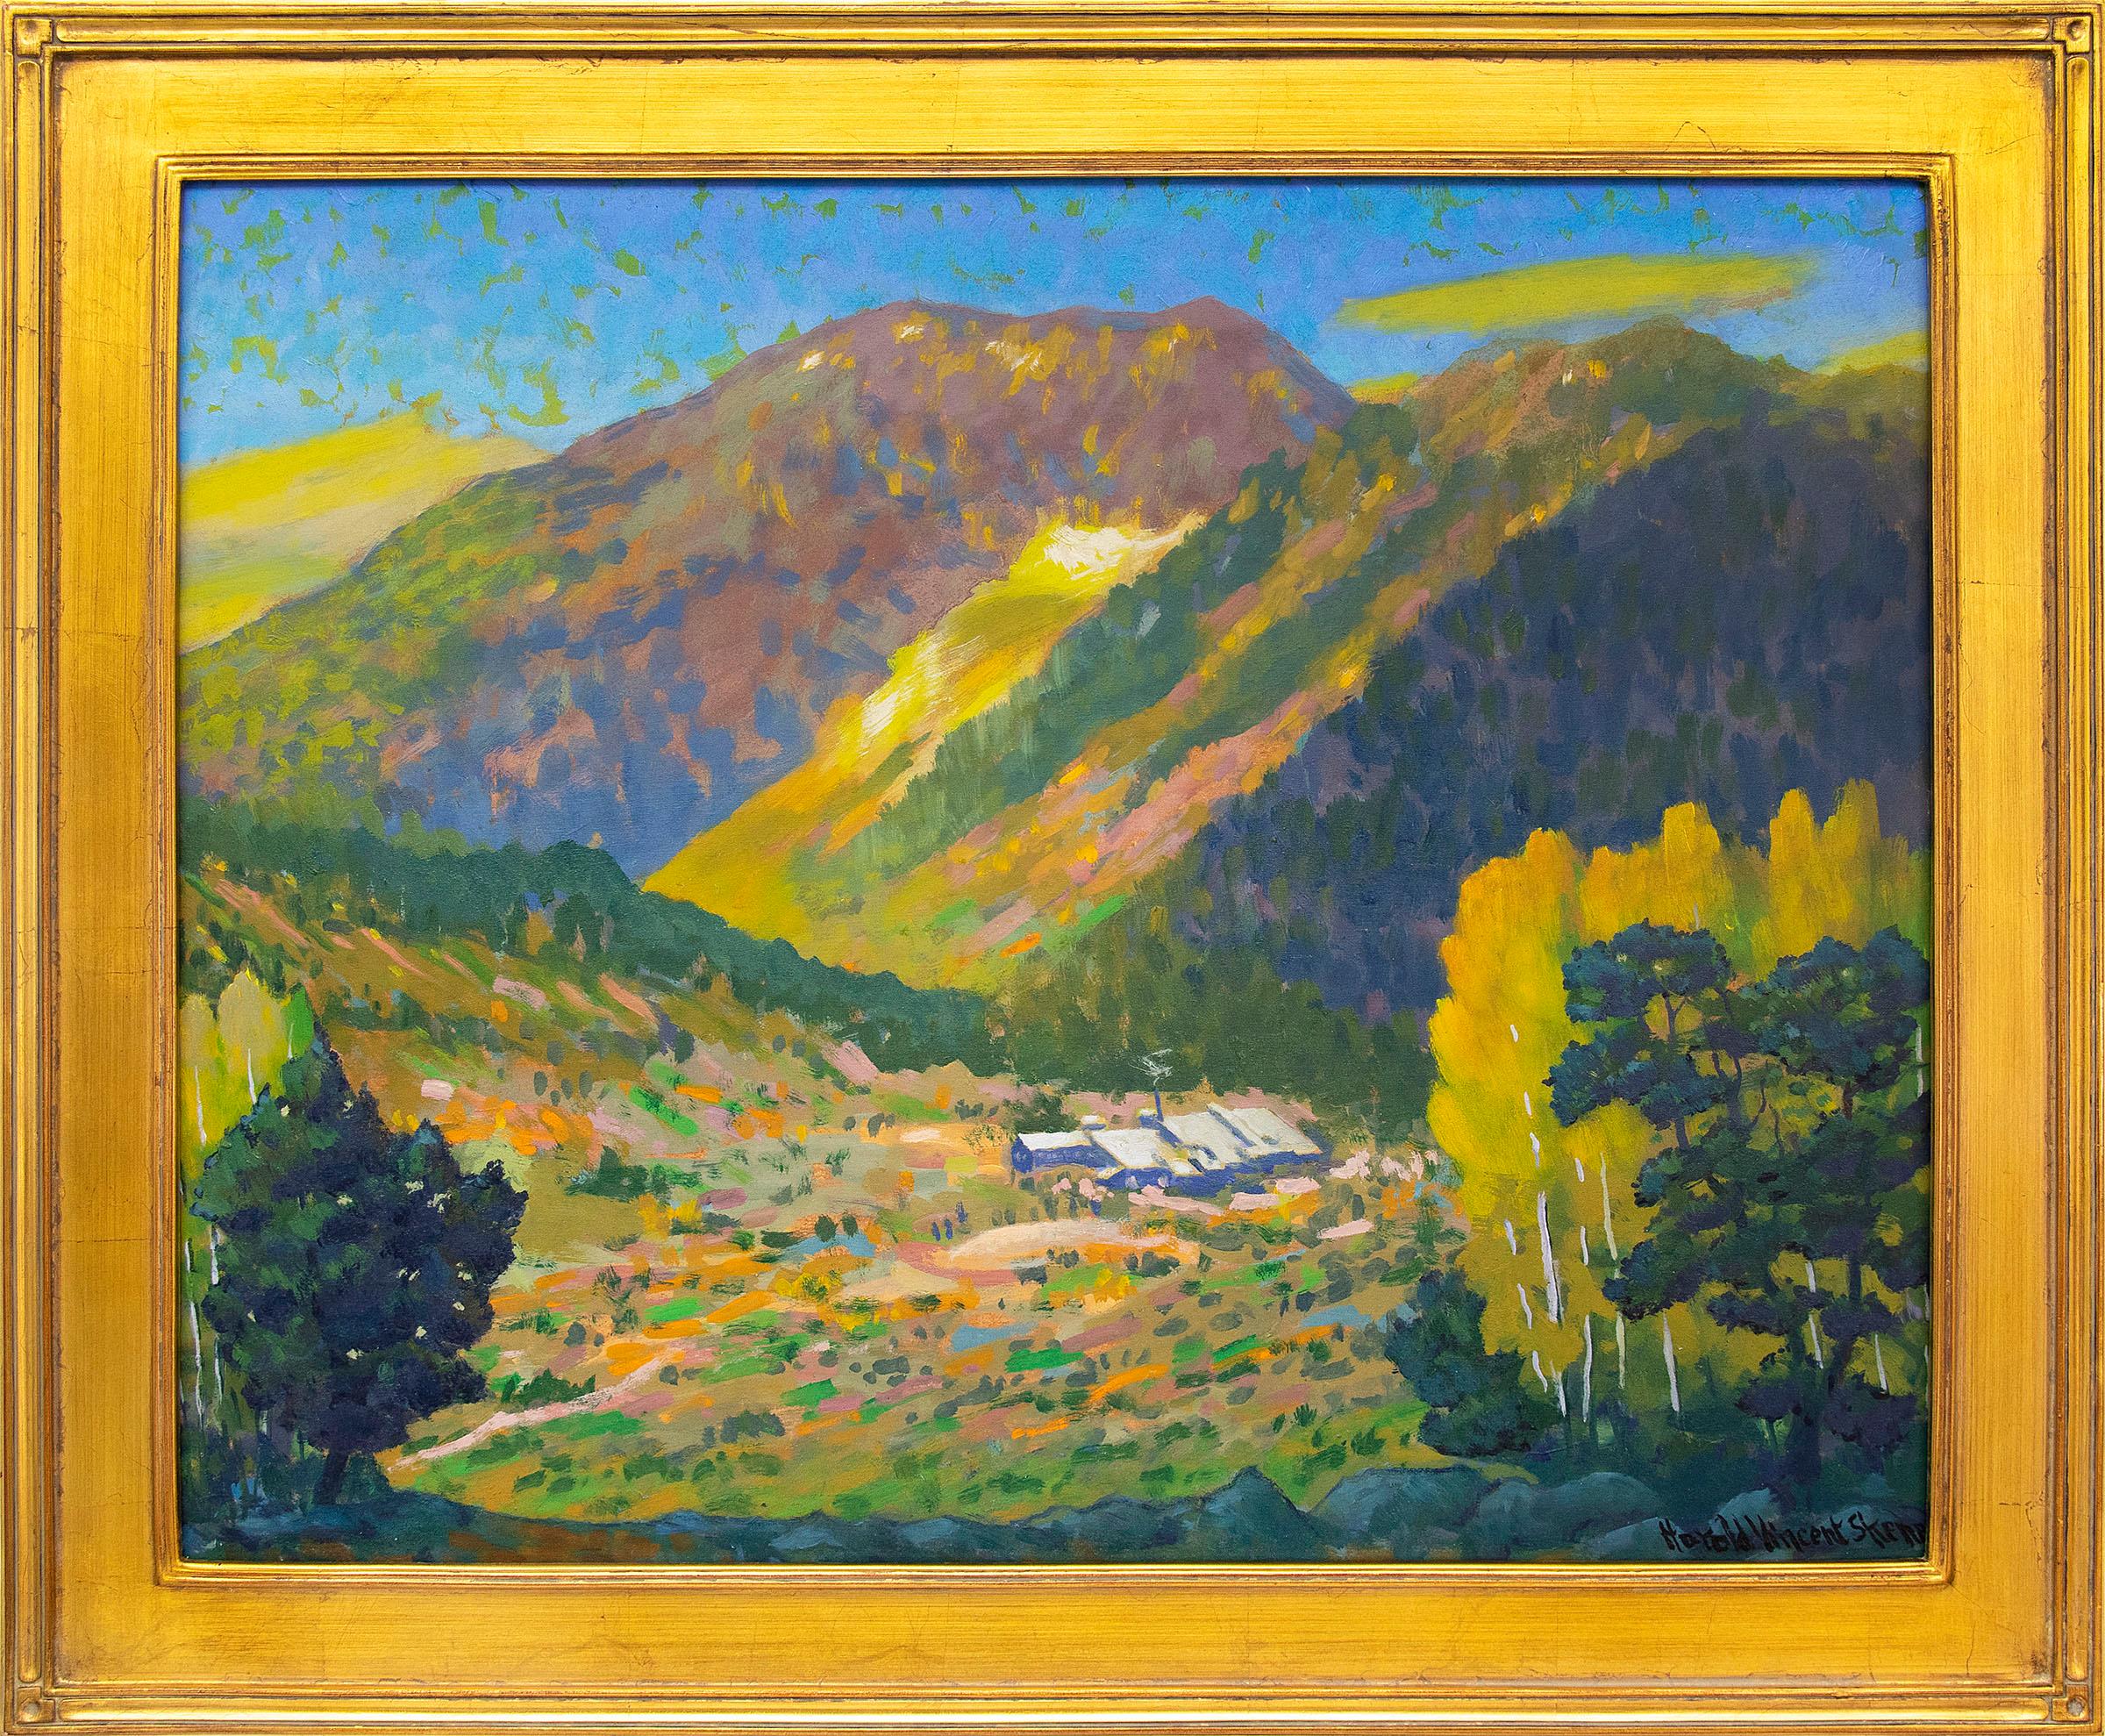 Harold Vincent Skene Figurative Painting - Camp Bird Mine, Ouray, Colorado, Mountain Landscape in Green, Yellow, Blue